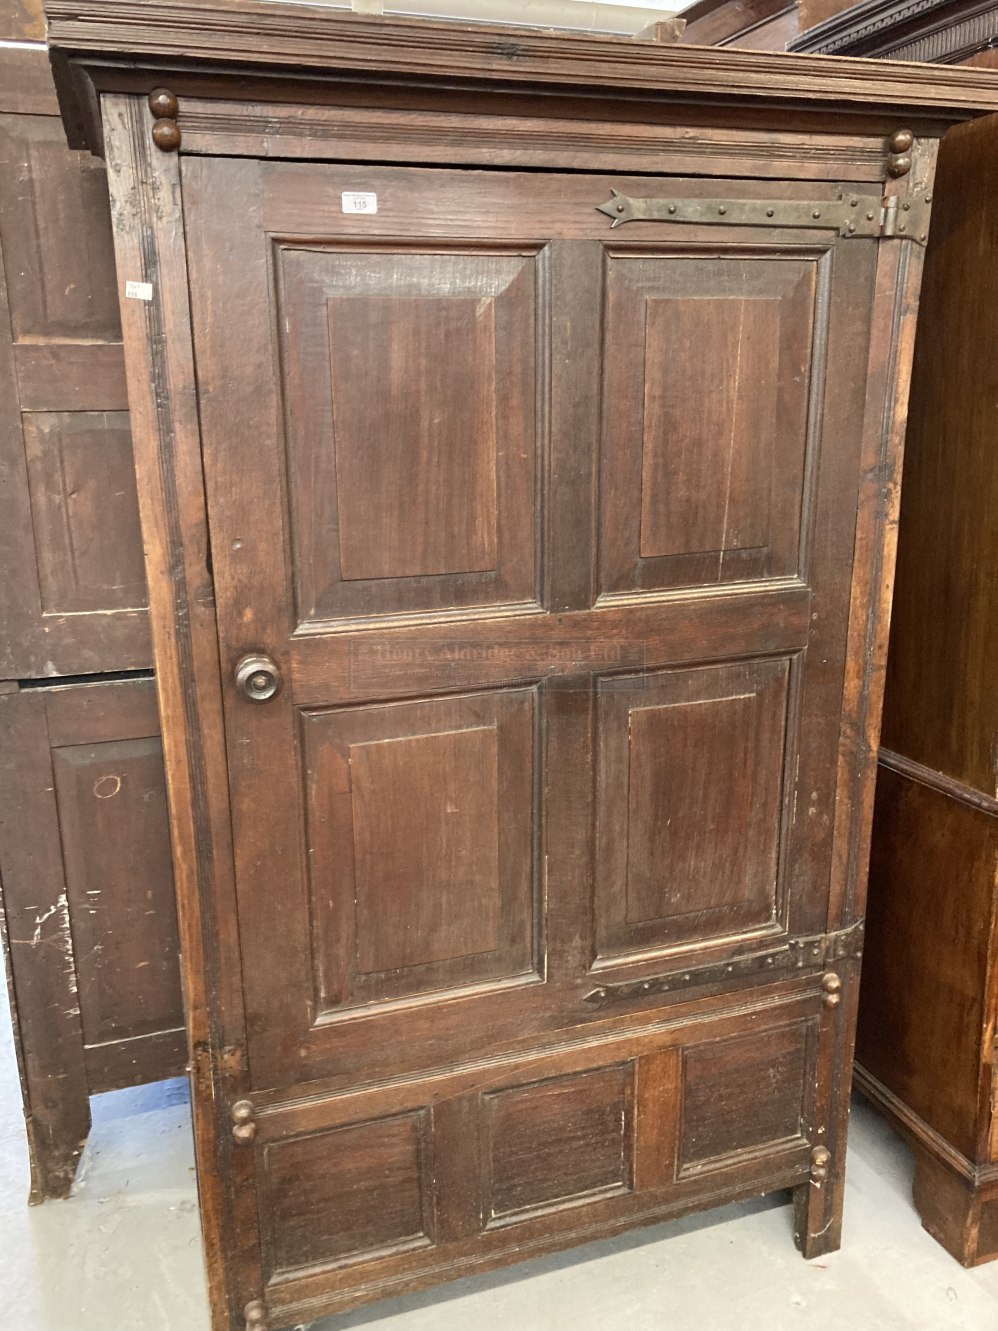 18th cent. Oak panelled kitchen cupboard with later additions. 41ins. x 72ins. x 21ins.